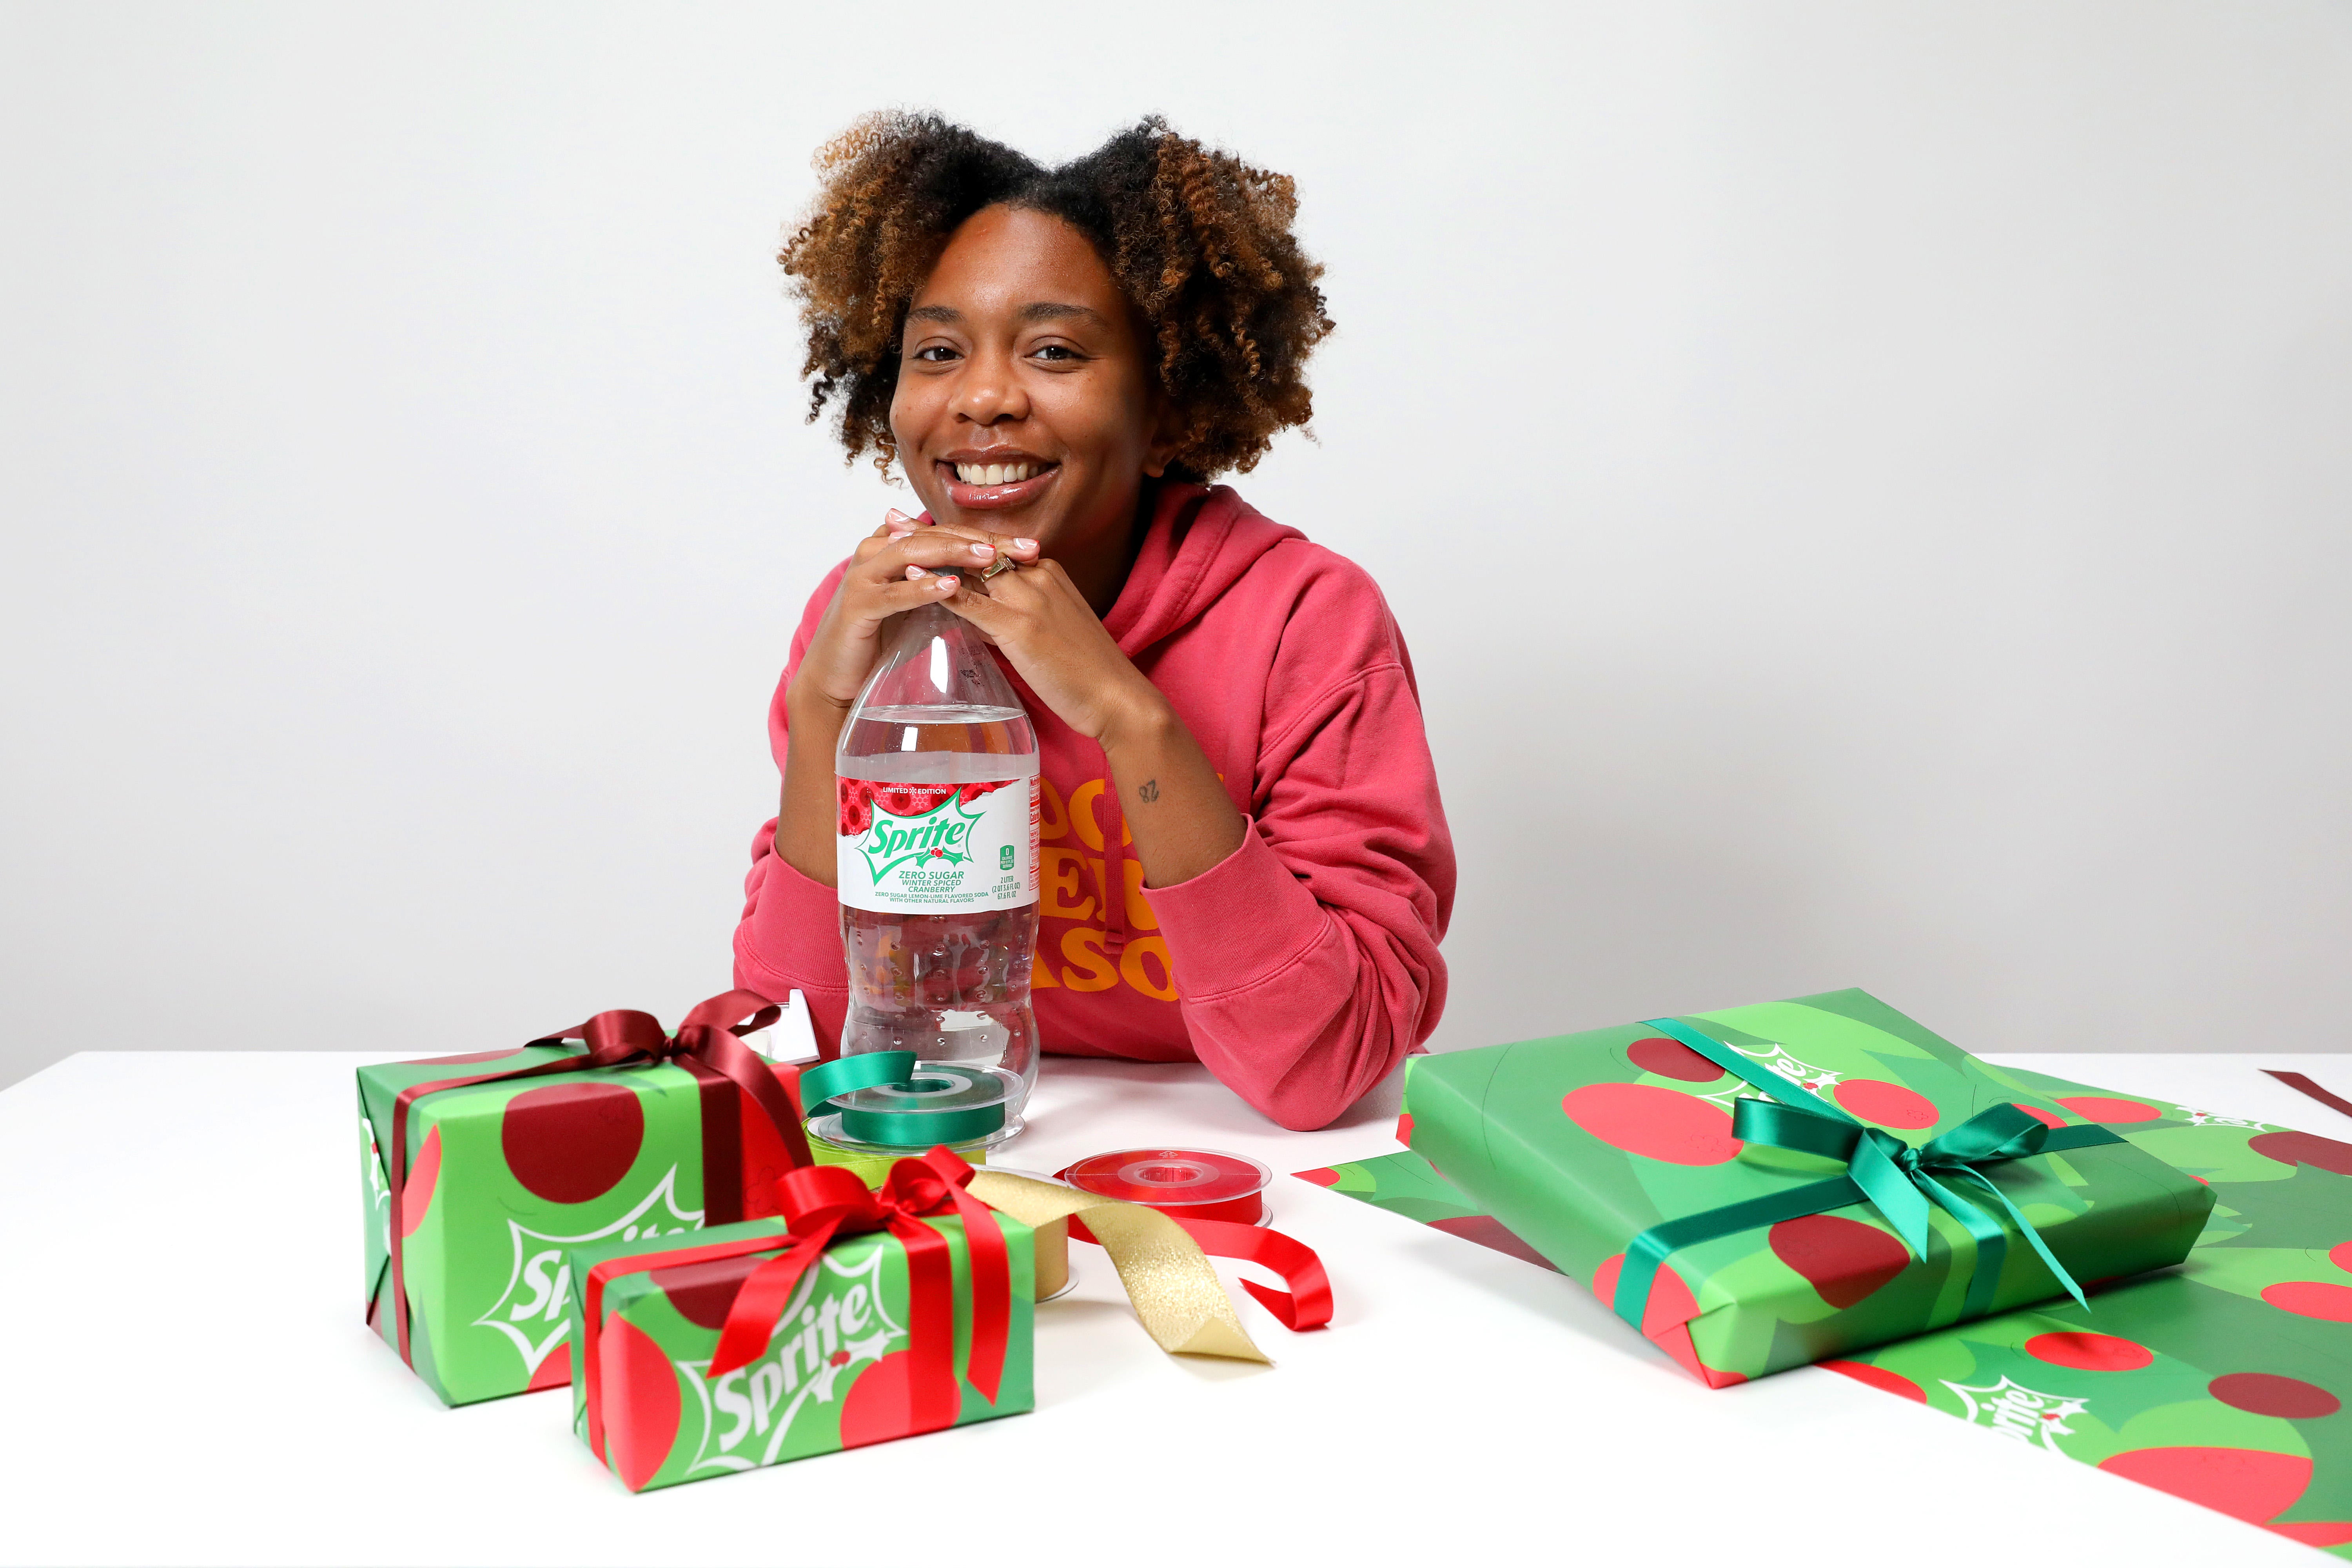 sprite-holiday-lto-flavor-and-unwrp-ashley-fouyolle-2.jpg